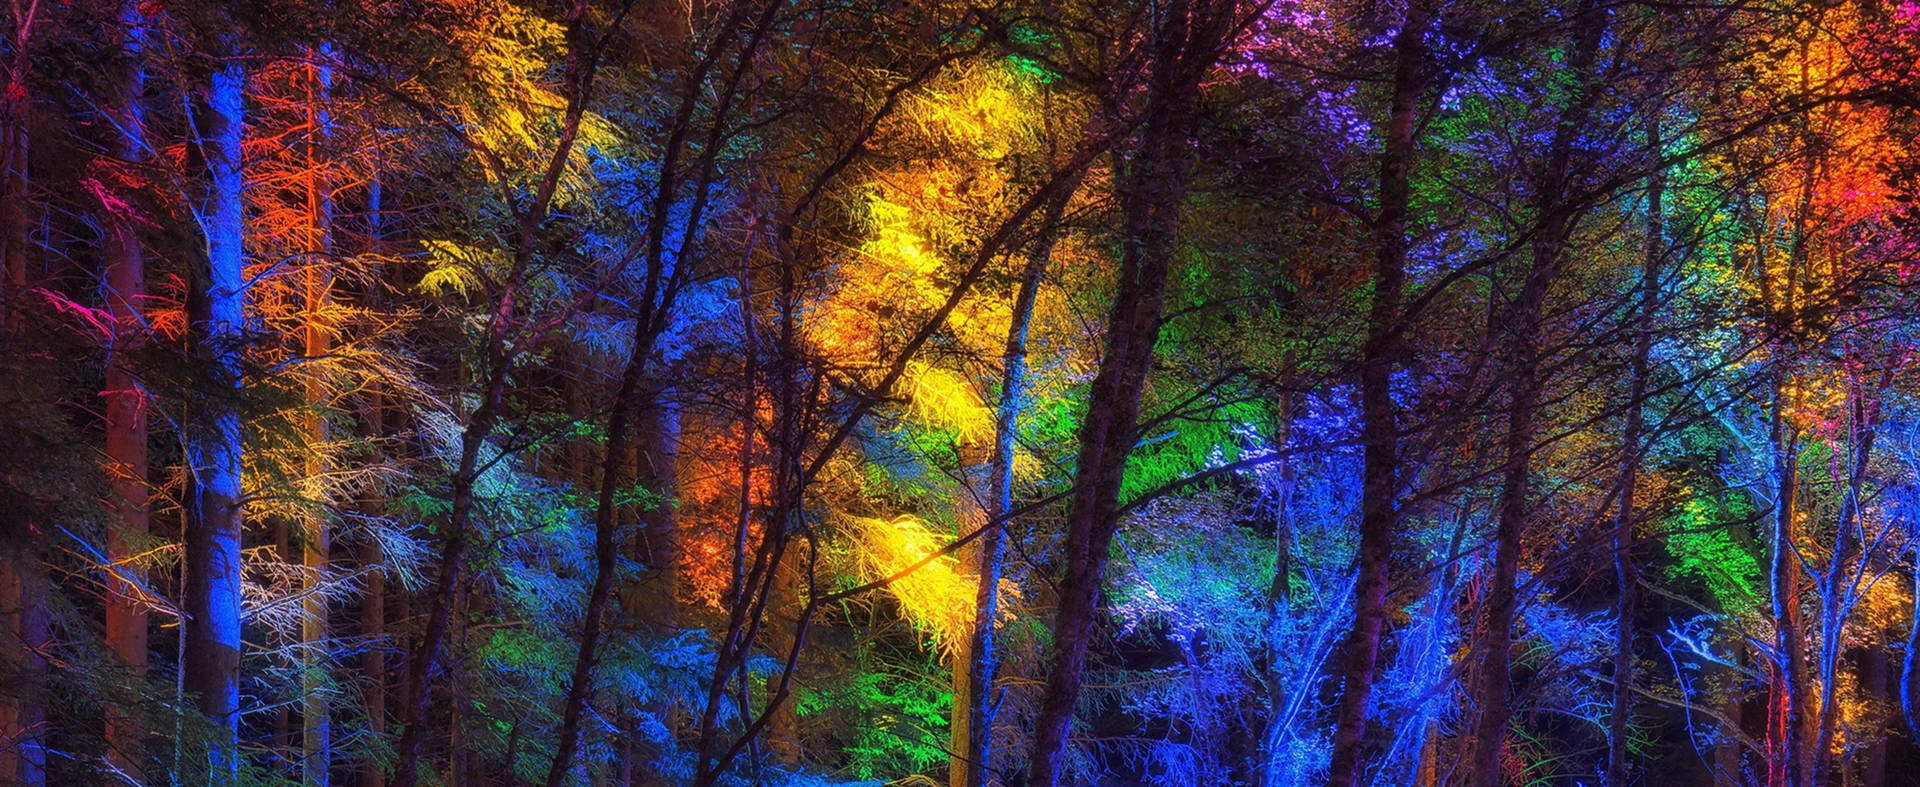 Download 3840x1600 Colorful Forest Trees Wallpaper